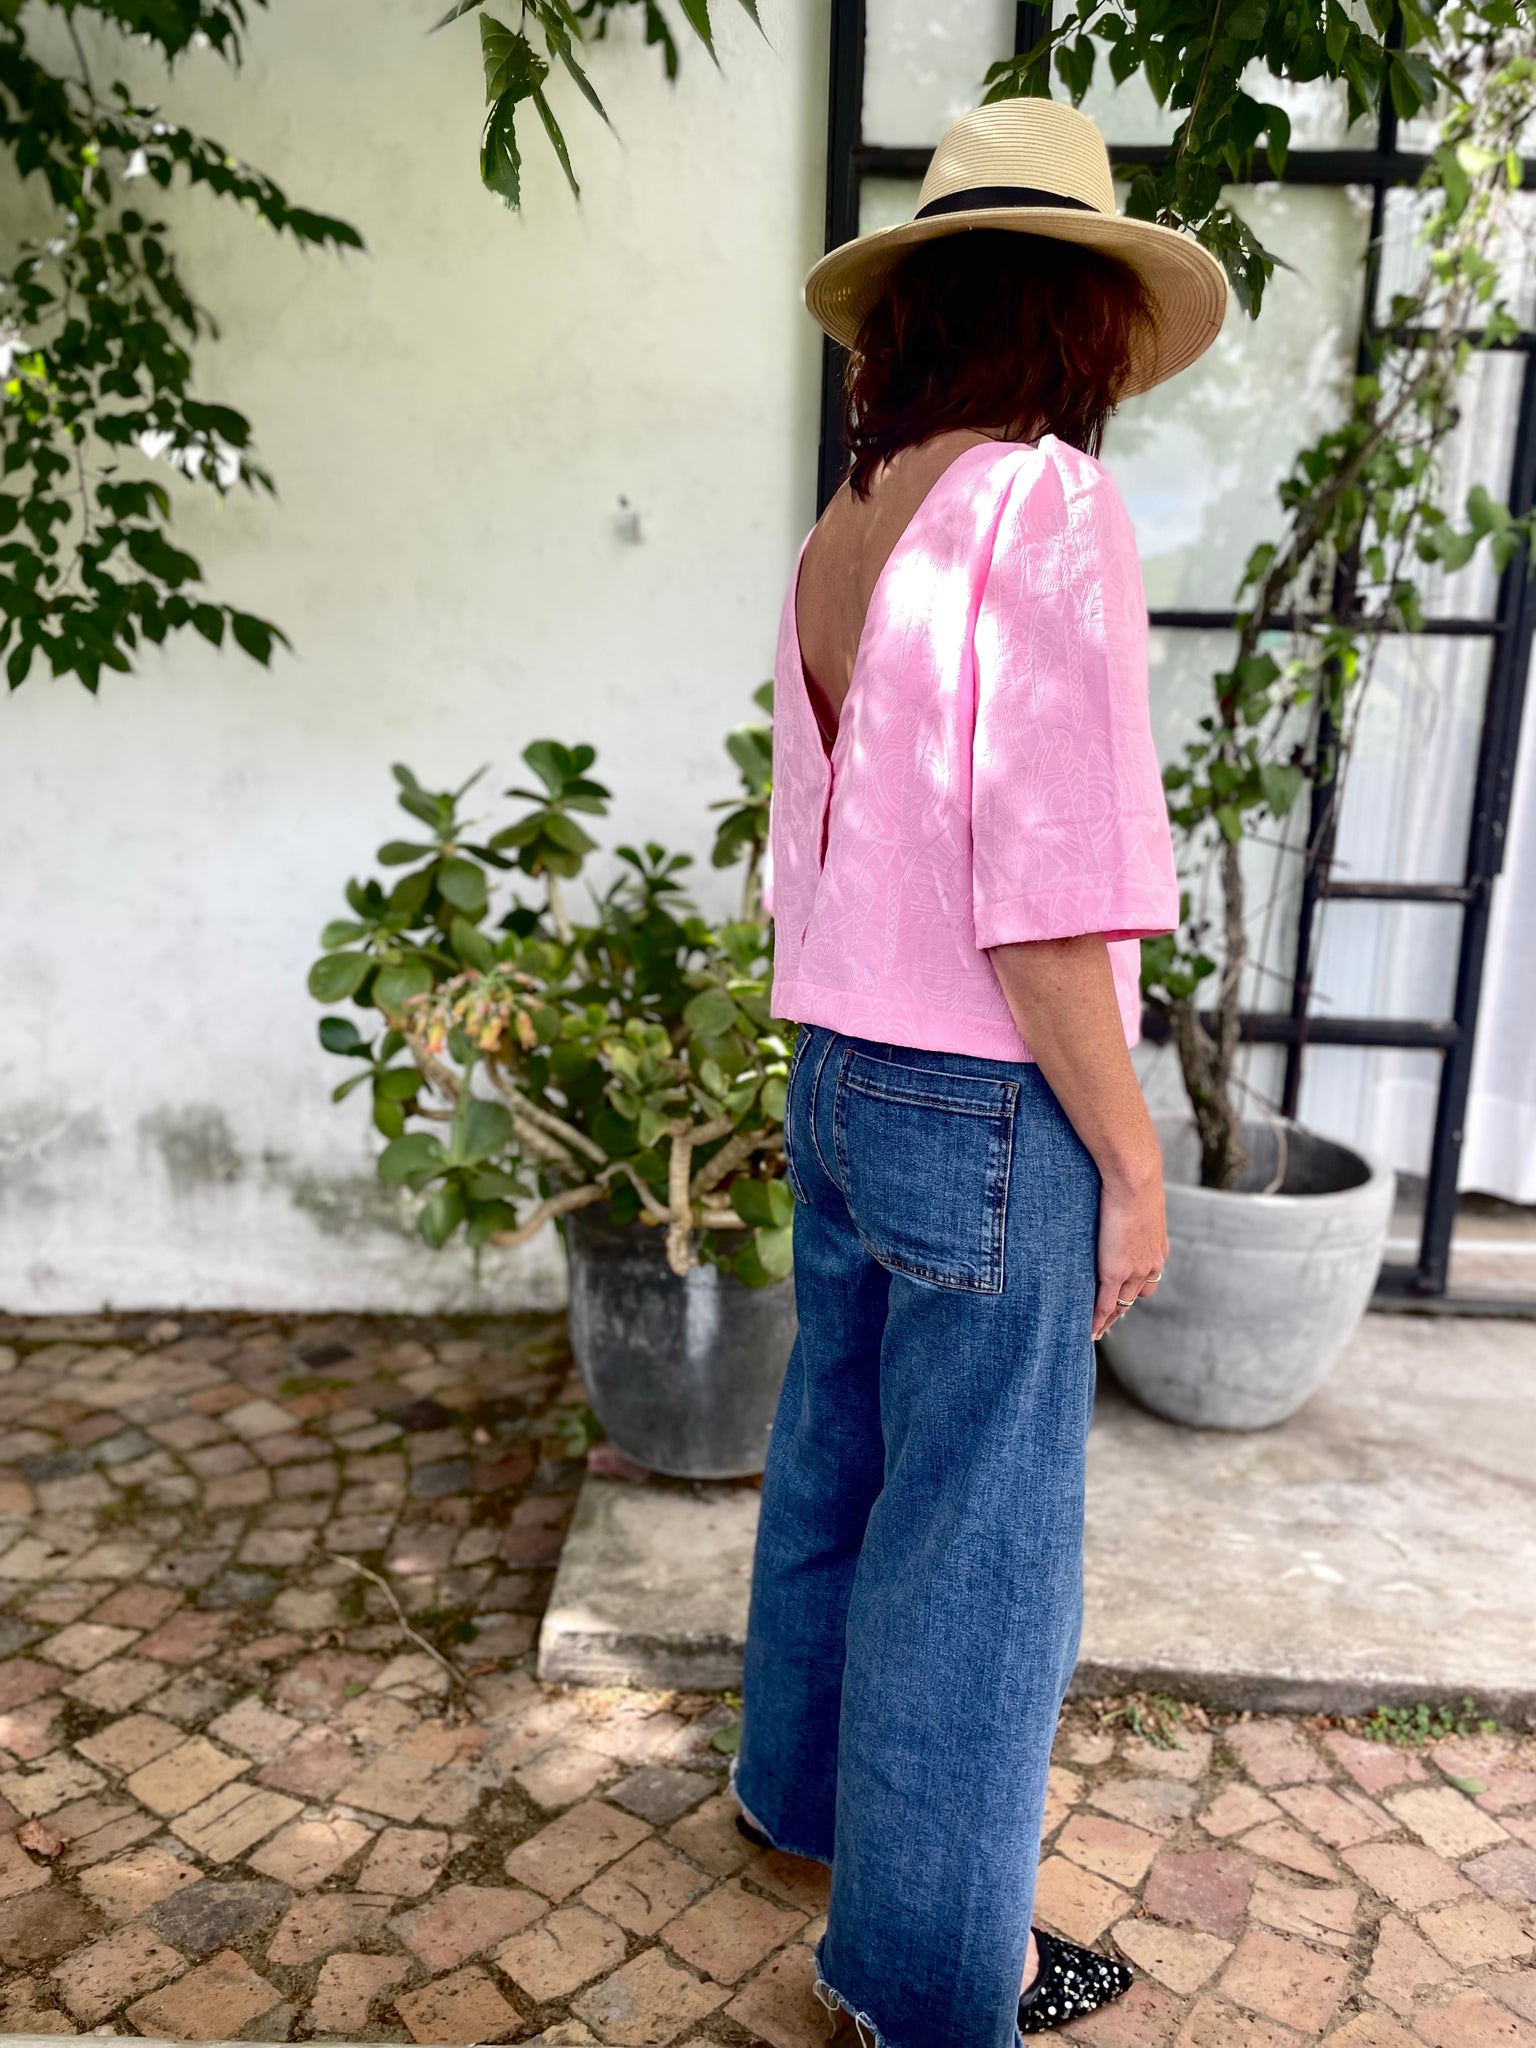 30% OFF SALE! PINK | BACK to FRONT BLOUSE